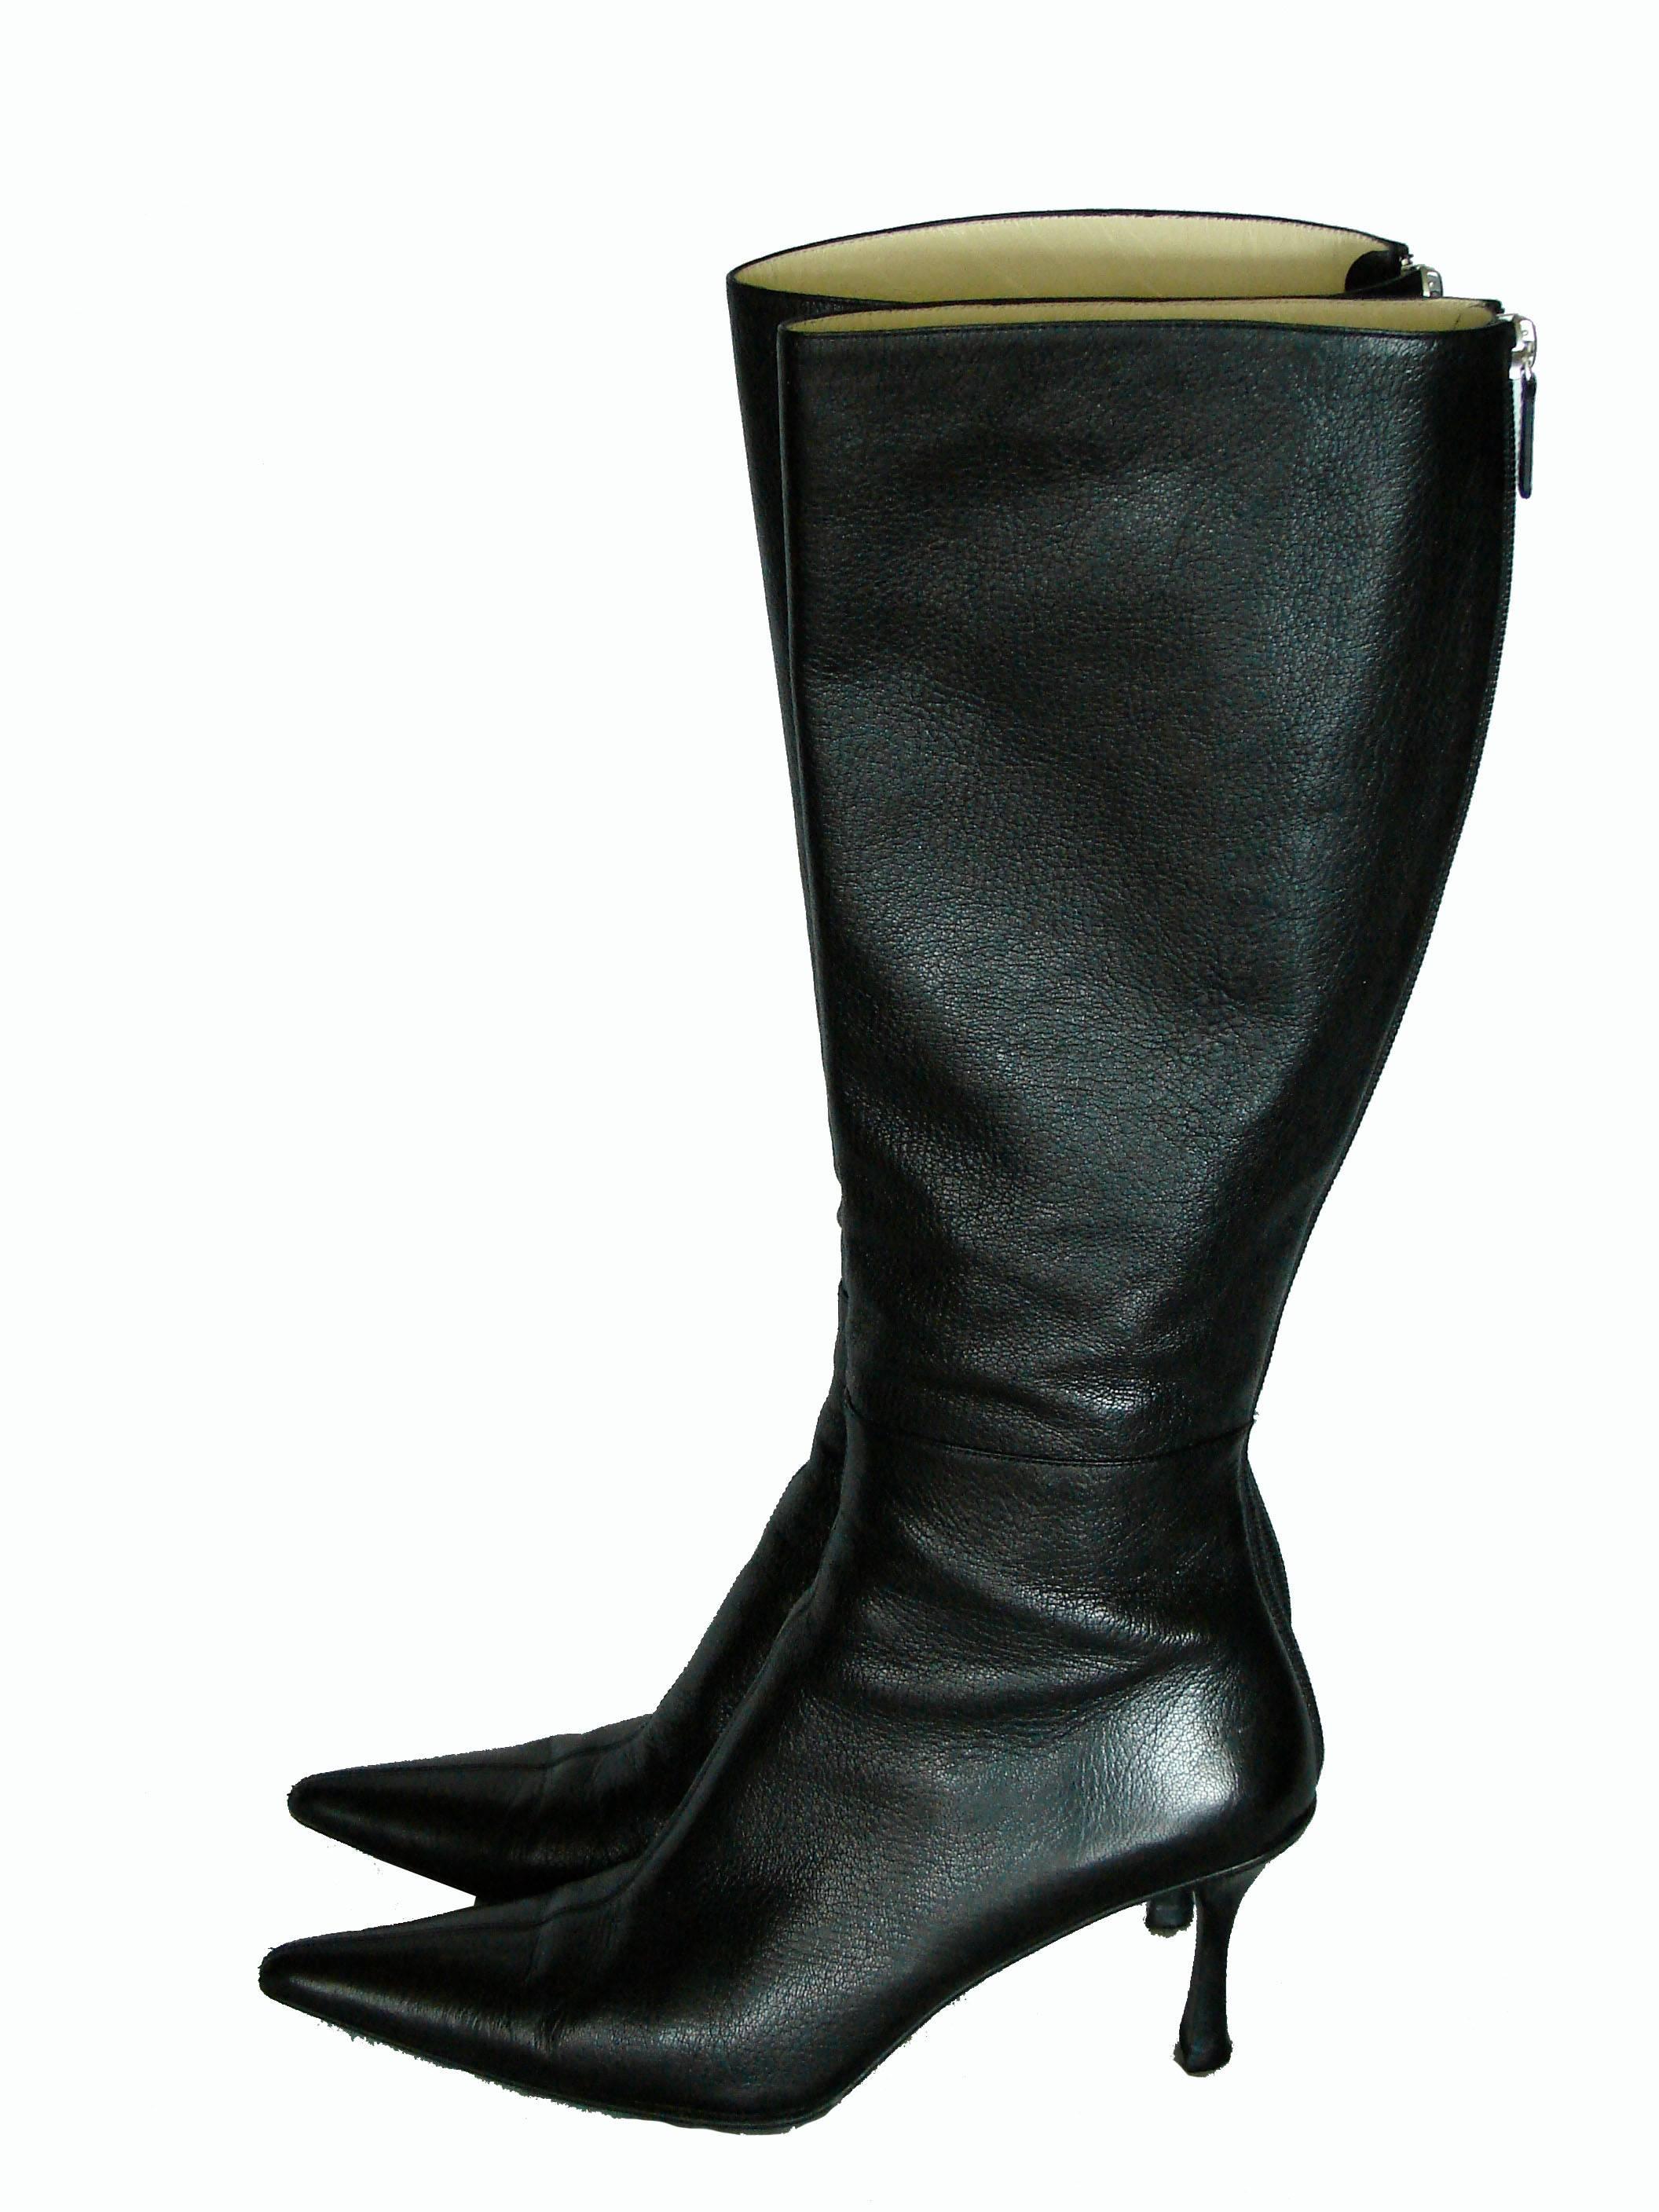 Gucci Black Kidskin Leather Knee High Boots Gomma Bali sz7.5 + Box + Dust Cover In Excellent Condition In Port Saint Lucie, FL